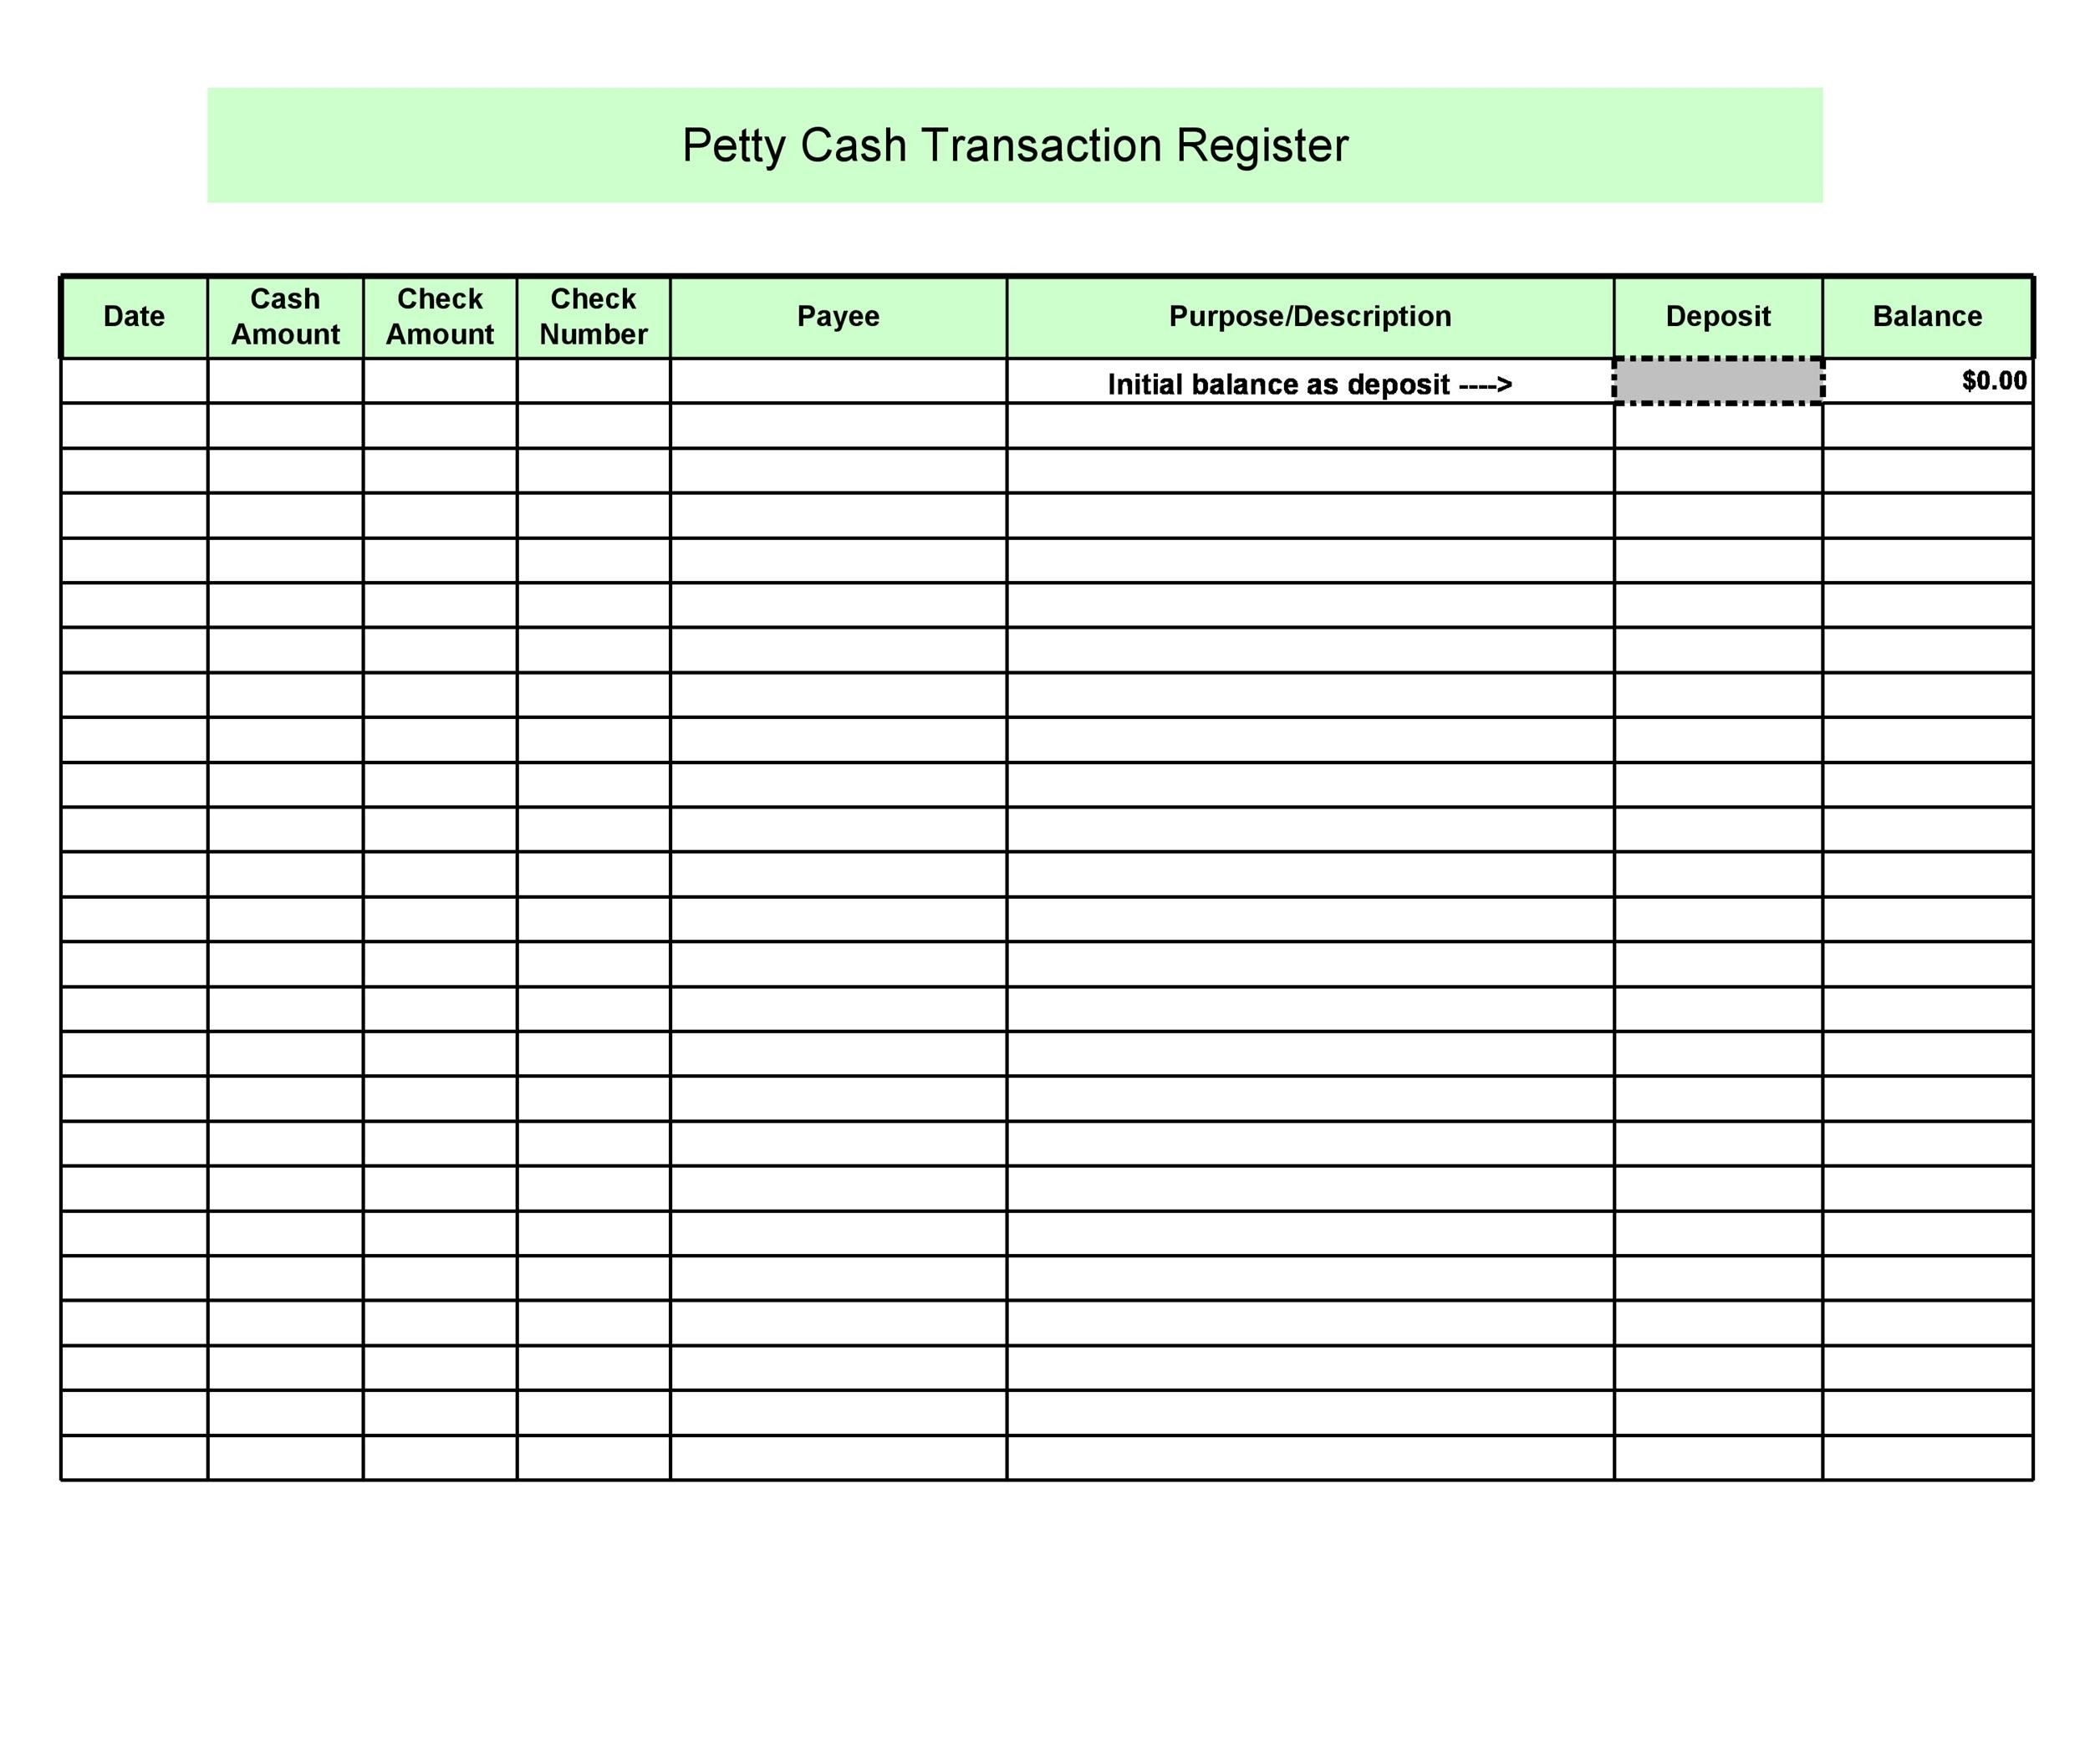 Daily Cash Sheet ~ Excel Templates Inside Petty Cash Expense Report Template